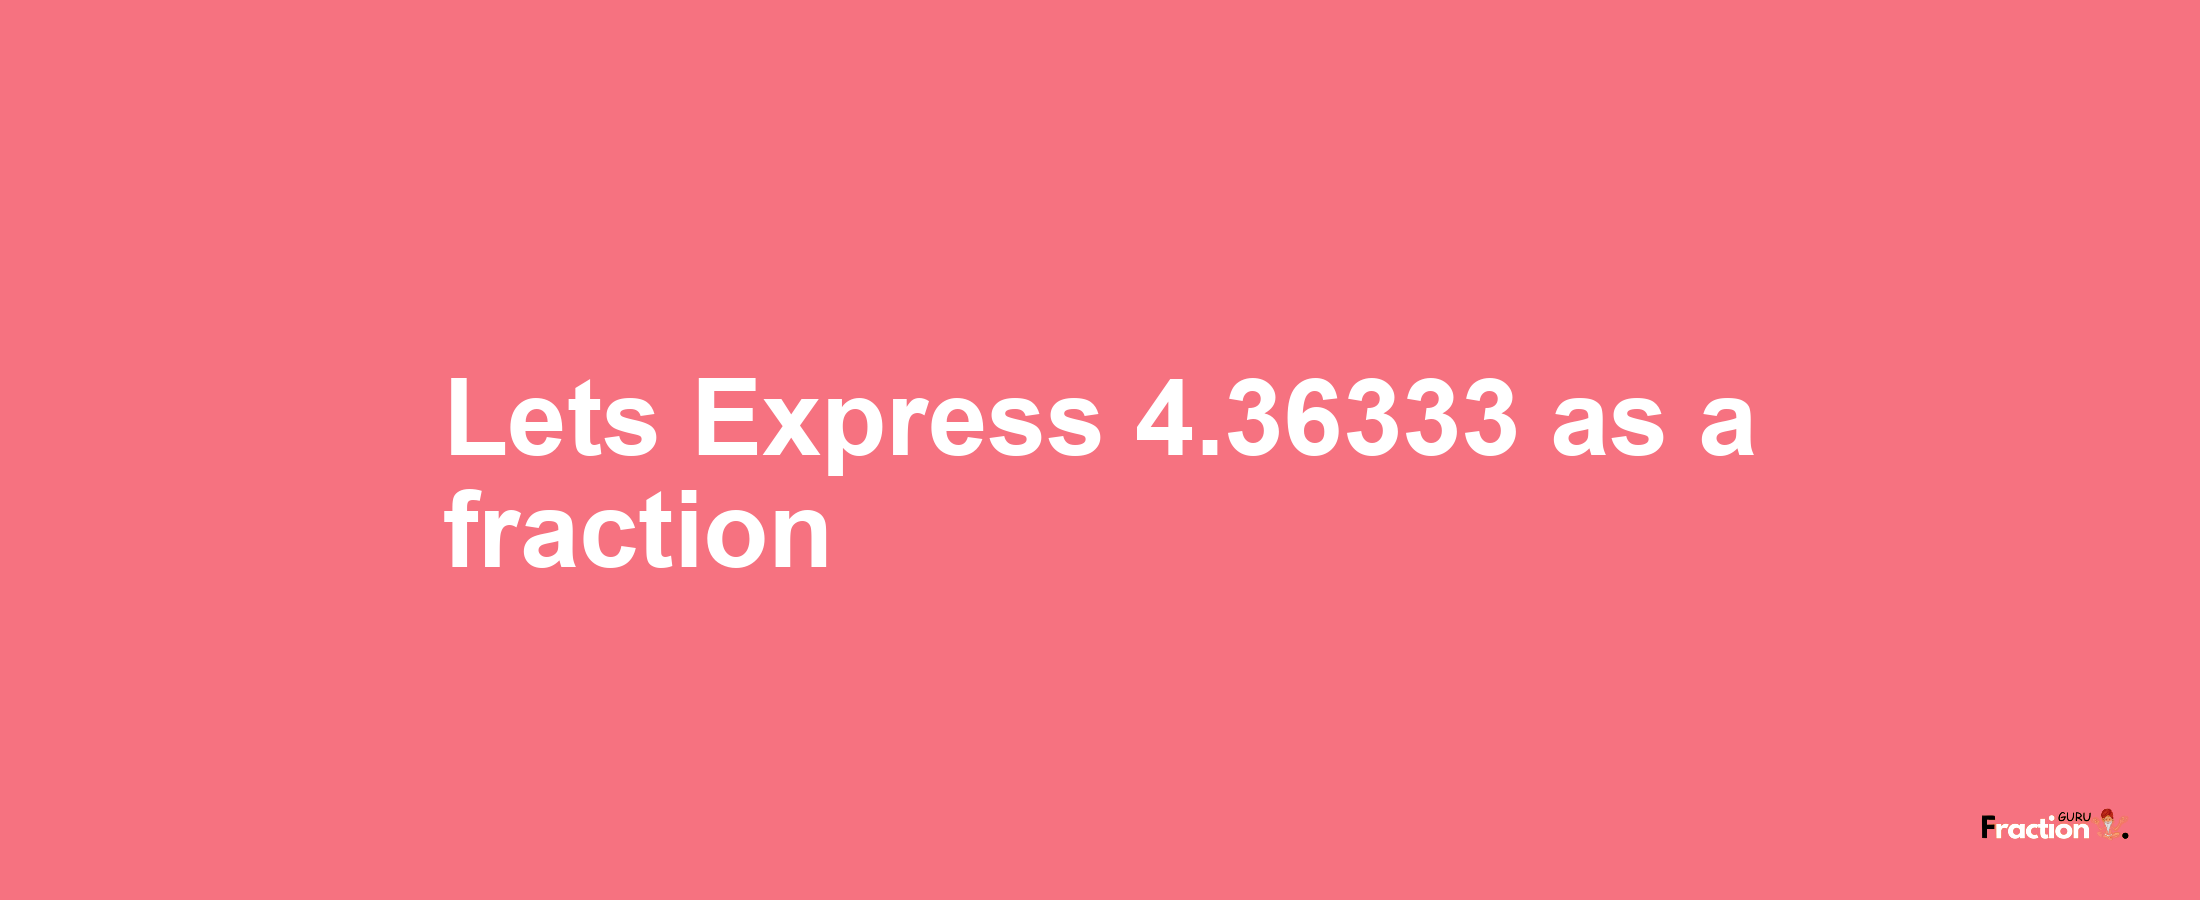 Lets Express 4.36333 as afraction